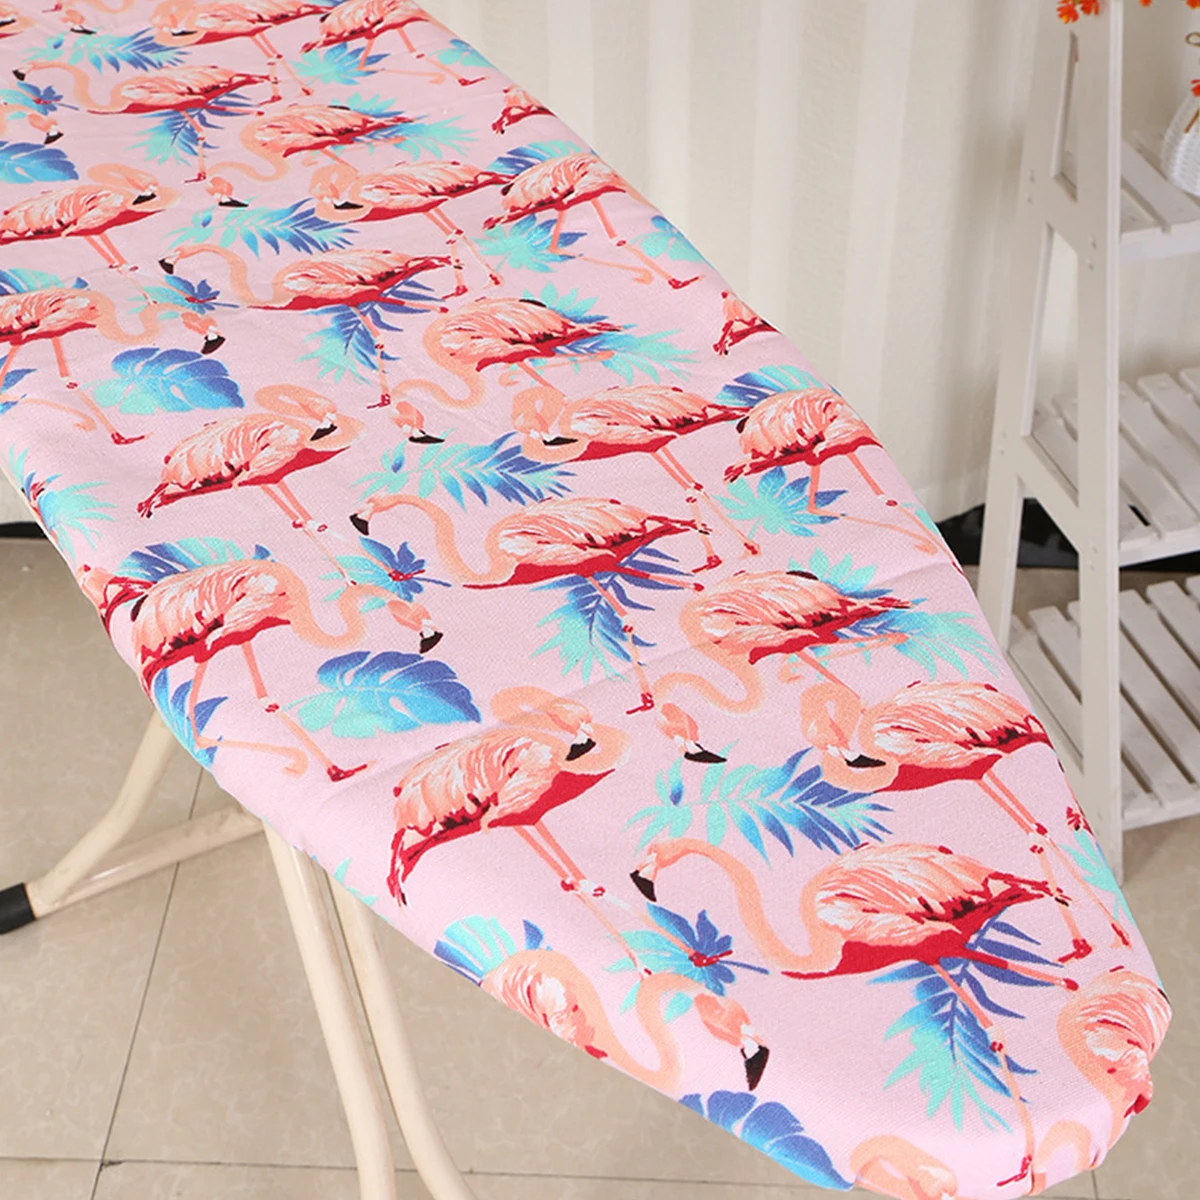 Ironing Board Cover Ironing Board Pad Replacement Heat Resistant Small Ironing  Board Cover Durable Elegant Printed Pink Flamingo - AliExpress